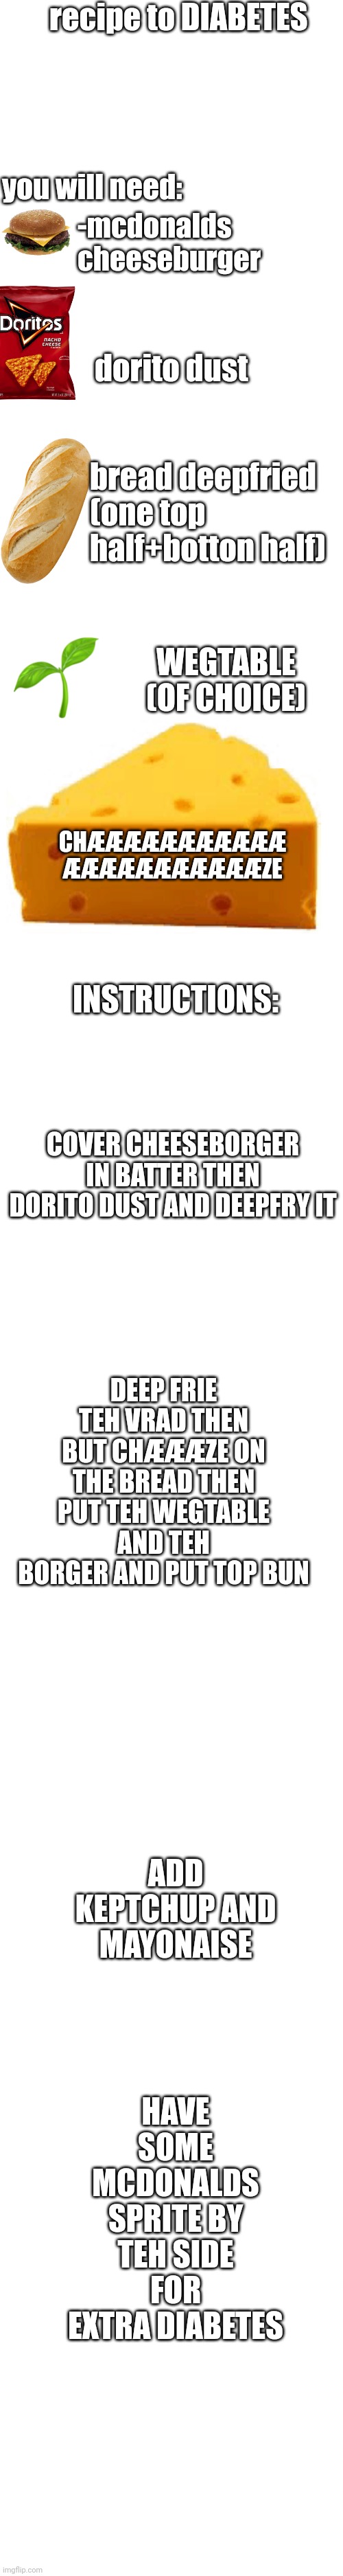 DIABETES SPEEDRUN | recipe to DIABETES; you will need:; -mcdonalds cheeseburger; dorito dust; bread deepfried (one top half+botton half); WEGTABLE
(OF CHOICE); CHÆÆÆÆÆÆÆÆÆÆÆ
ÆÆÆÆÆÆÆÆÆÆÆZE; INSTRUCTIONS:; COVER CHEESEBORGER IN BATTER THEN DORITO DUST AND DEEPFRY IT; DEEP FRIE TEH VRAD THEN BUT CHÆÆÆZE ON THE BREAD THEN PUT TEH WEGTABLE AND TEH BORGER AND PUT TOP BUN; ADD KEPTCHUP AND
MAYONAISE; HAVE SOME MCDONALDS SPRITE BY TEH SIDE FOR EXTRA DIABETES | image tagged in diabetes,food | made w/ Imgflip meme maker